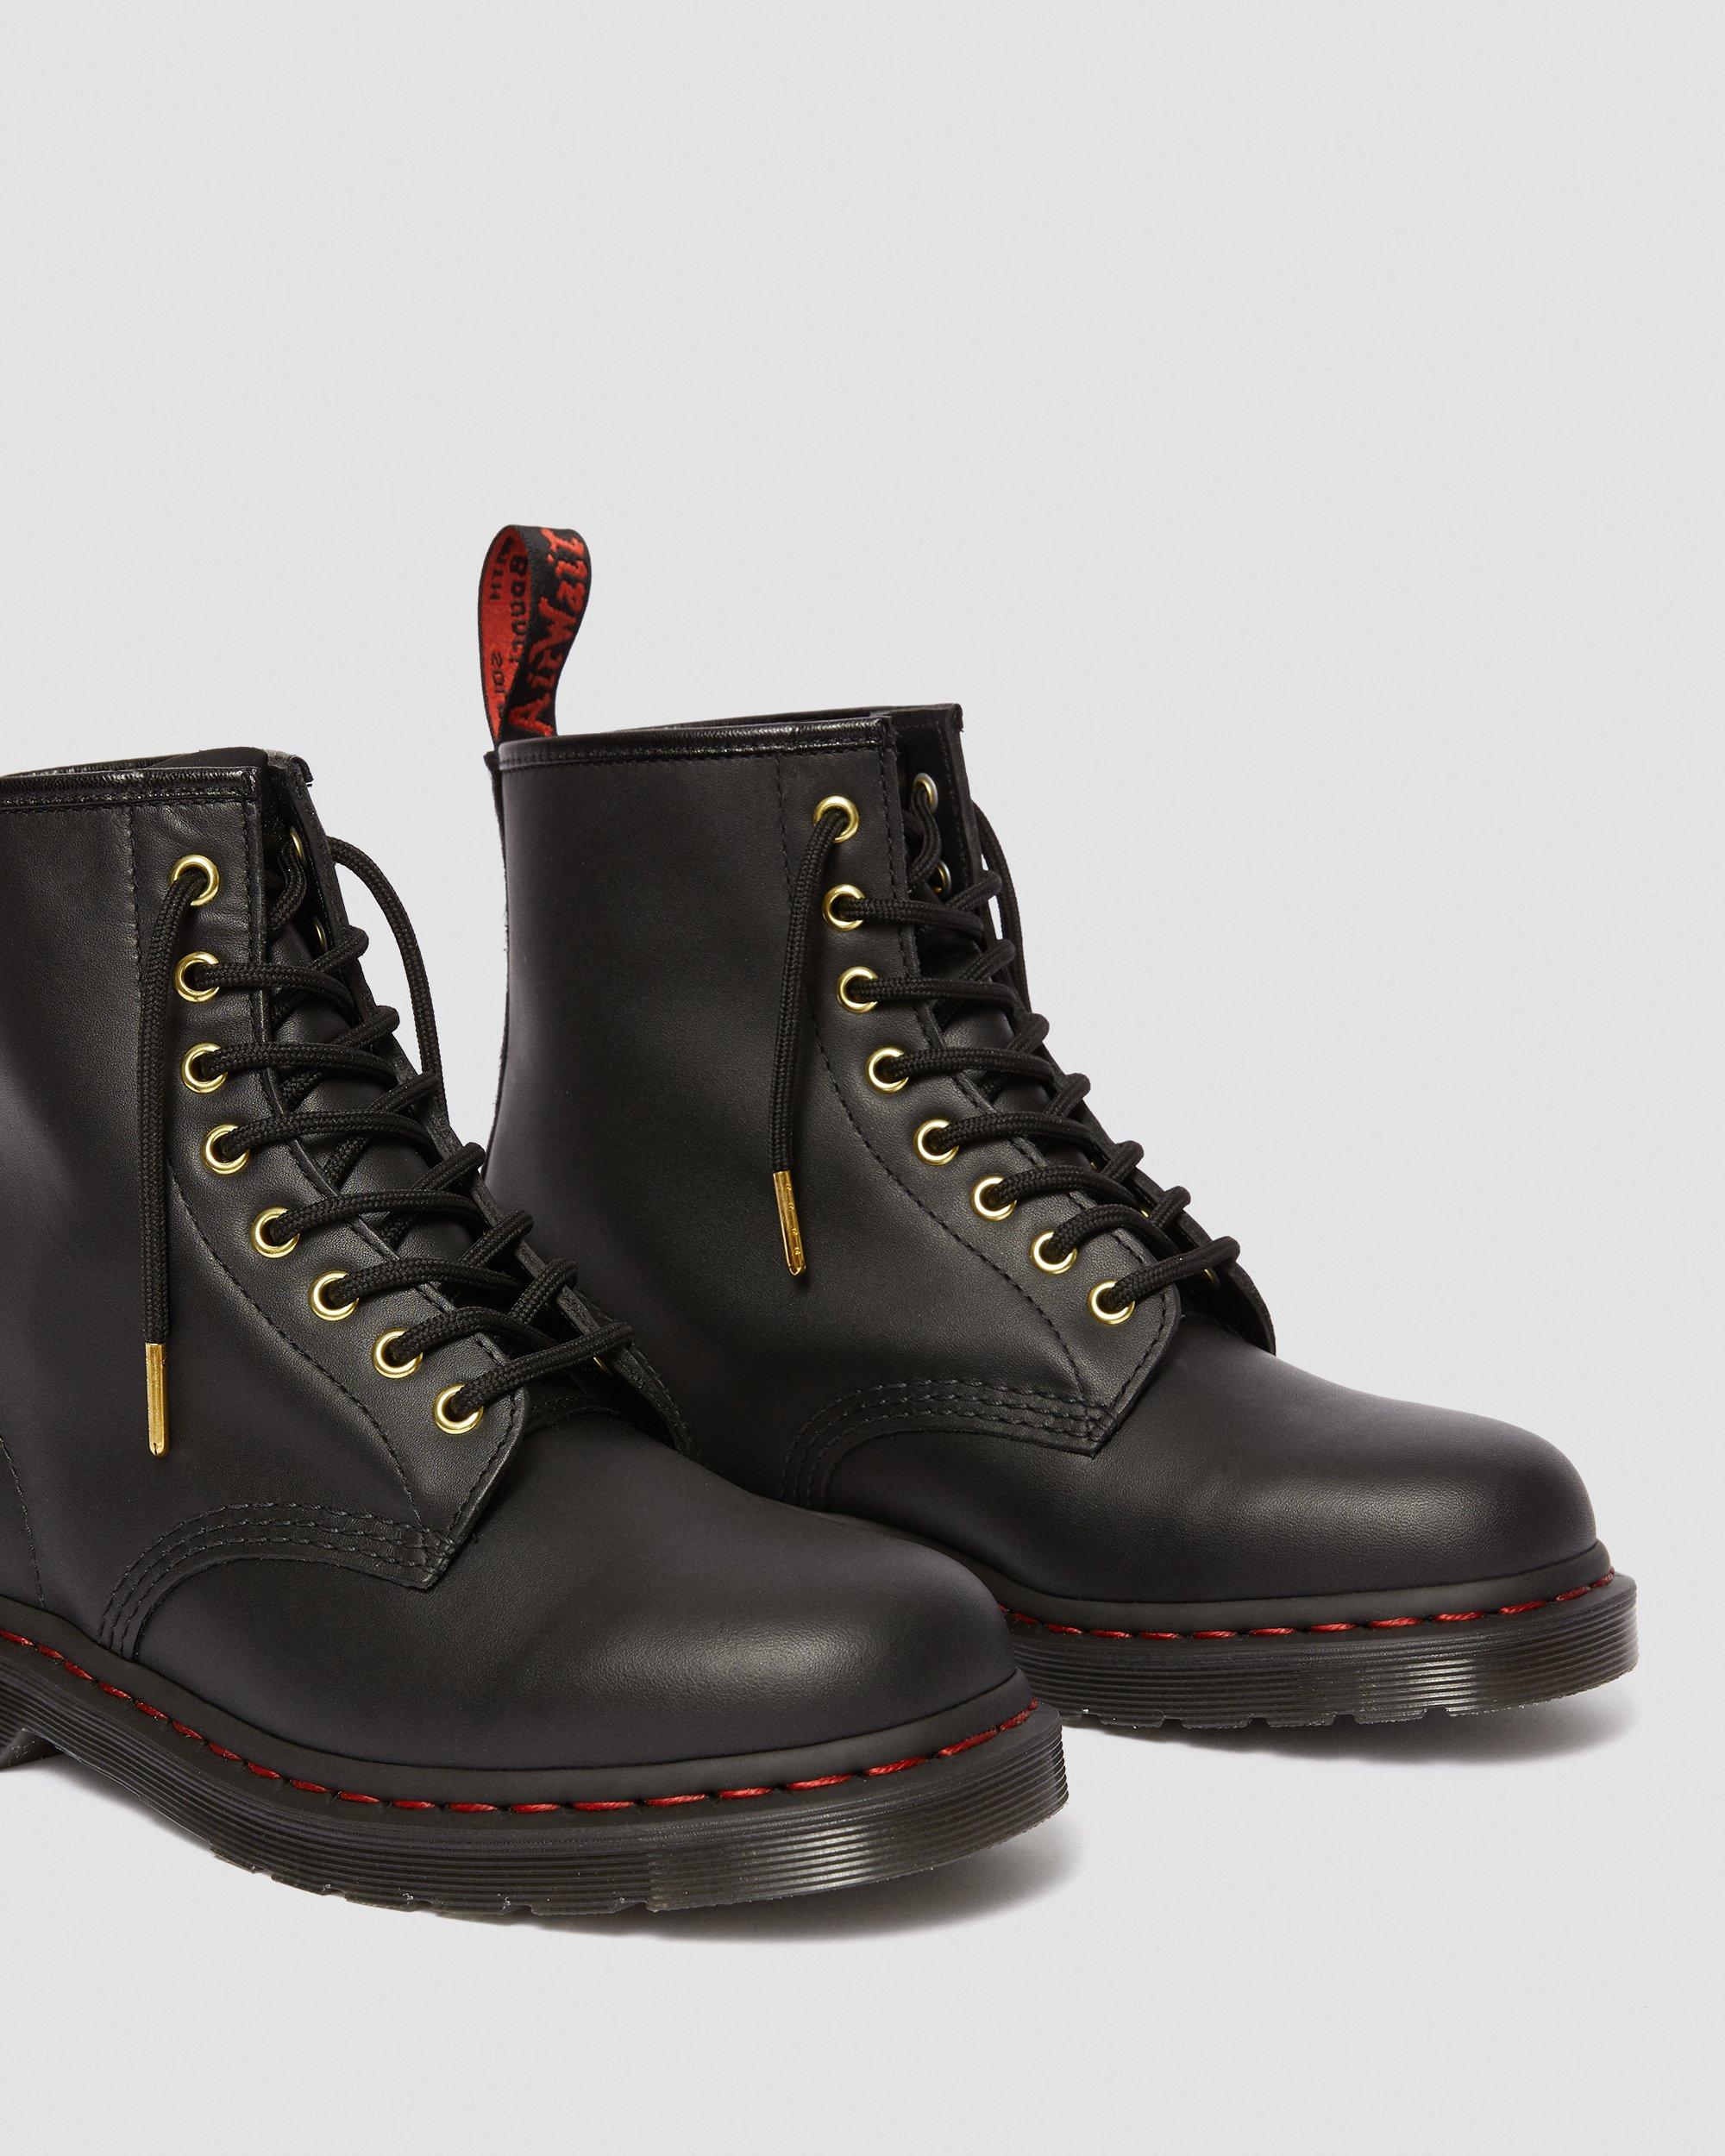 1460 CHINESE NEW YEAR STIEFEL AUS LEDER Dr. Martens